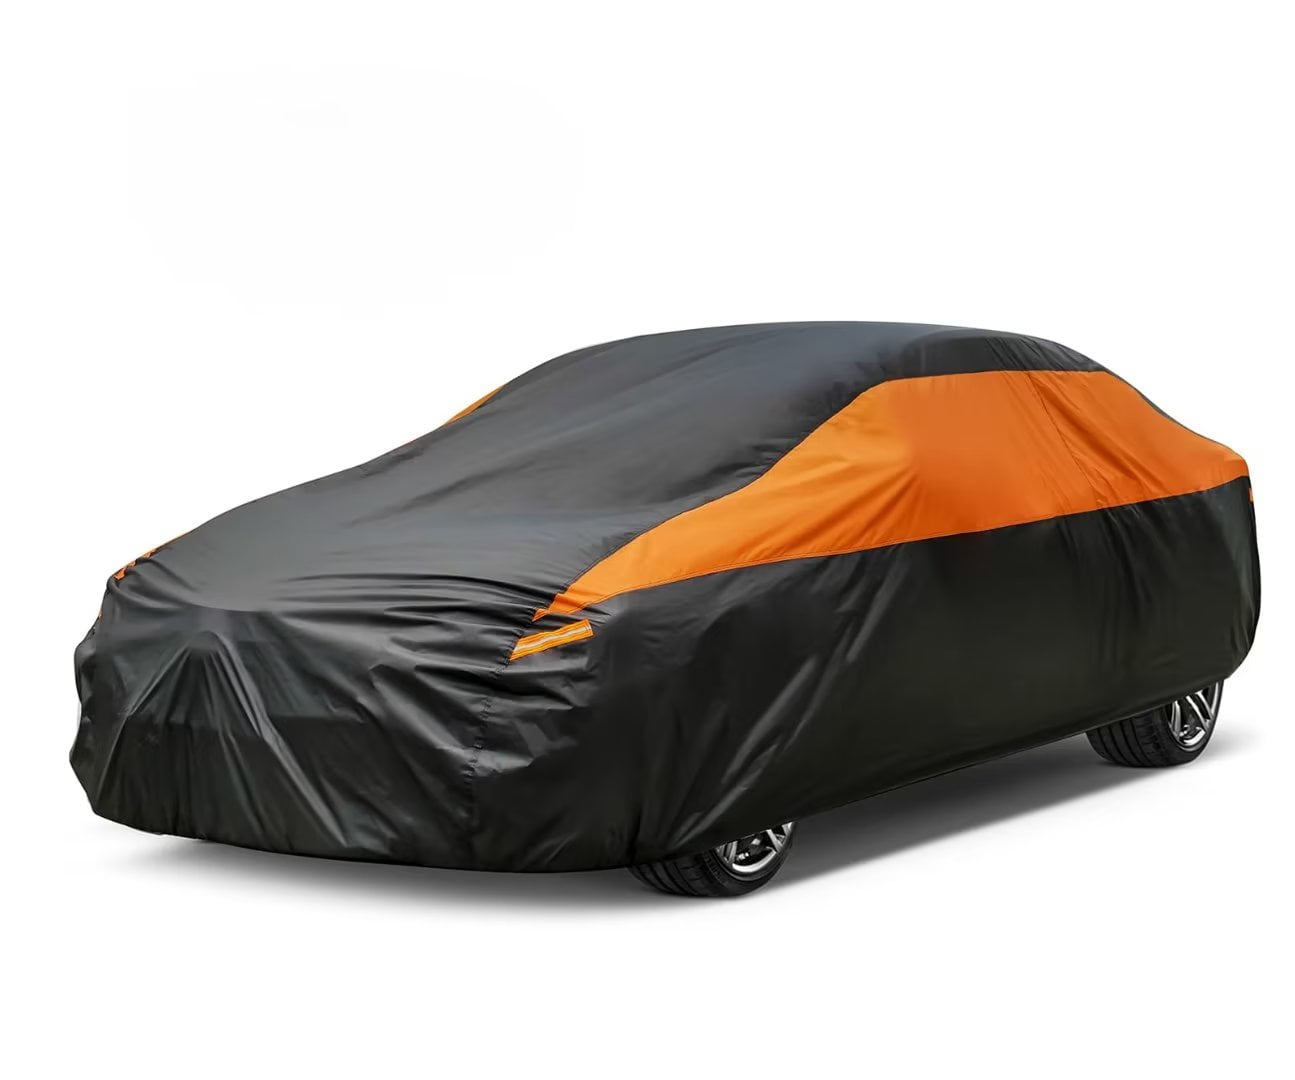 SUV Car Cover for Automobiles Waterproof All Weather , Size A8